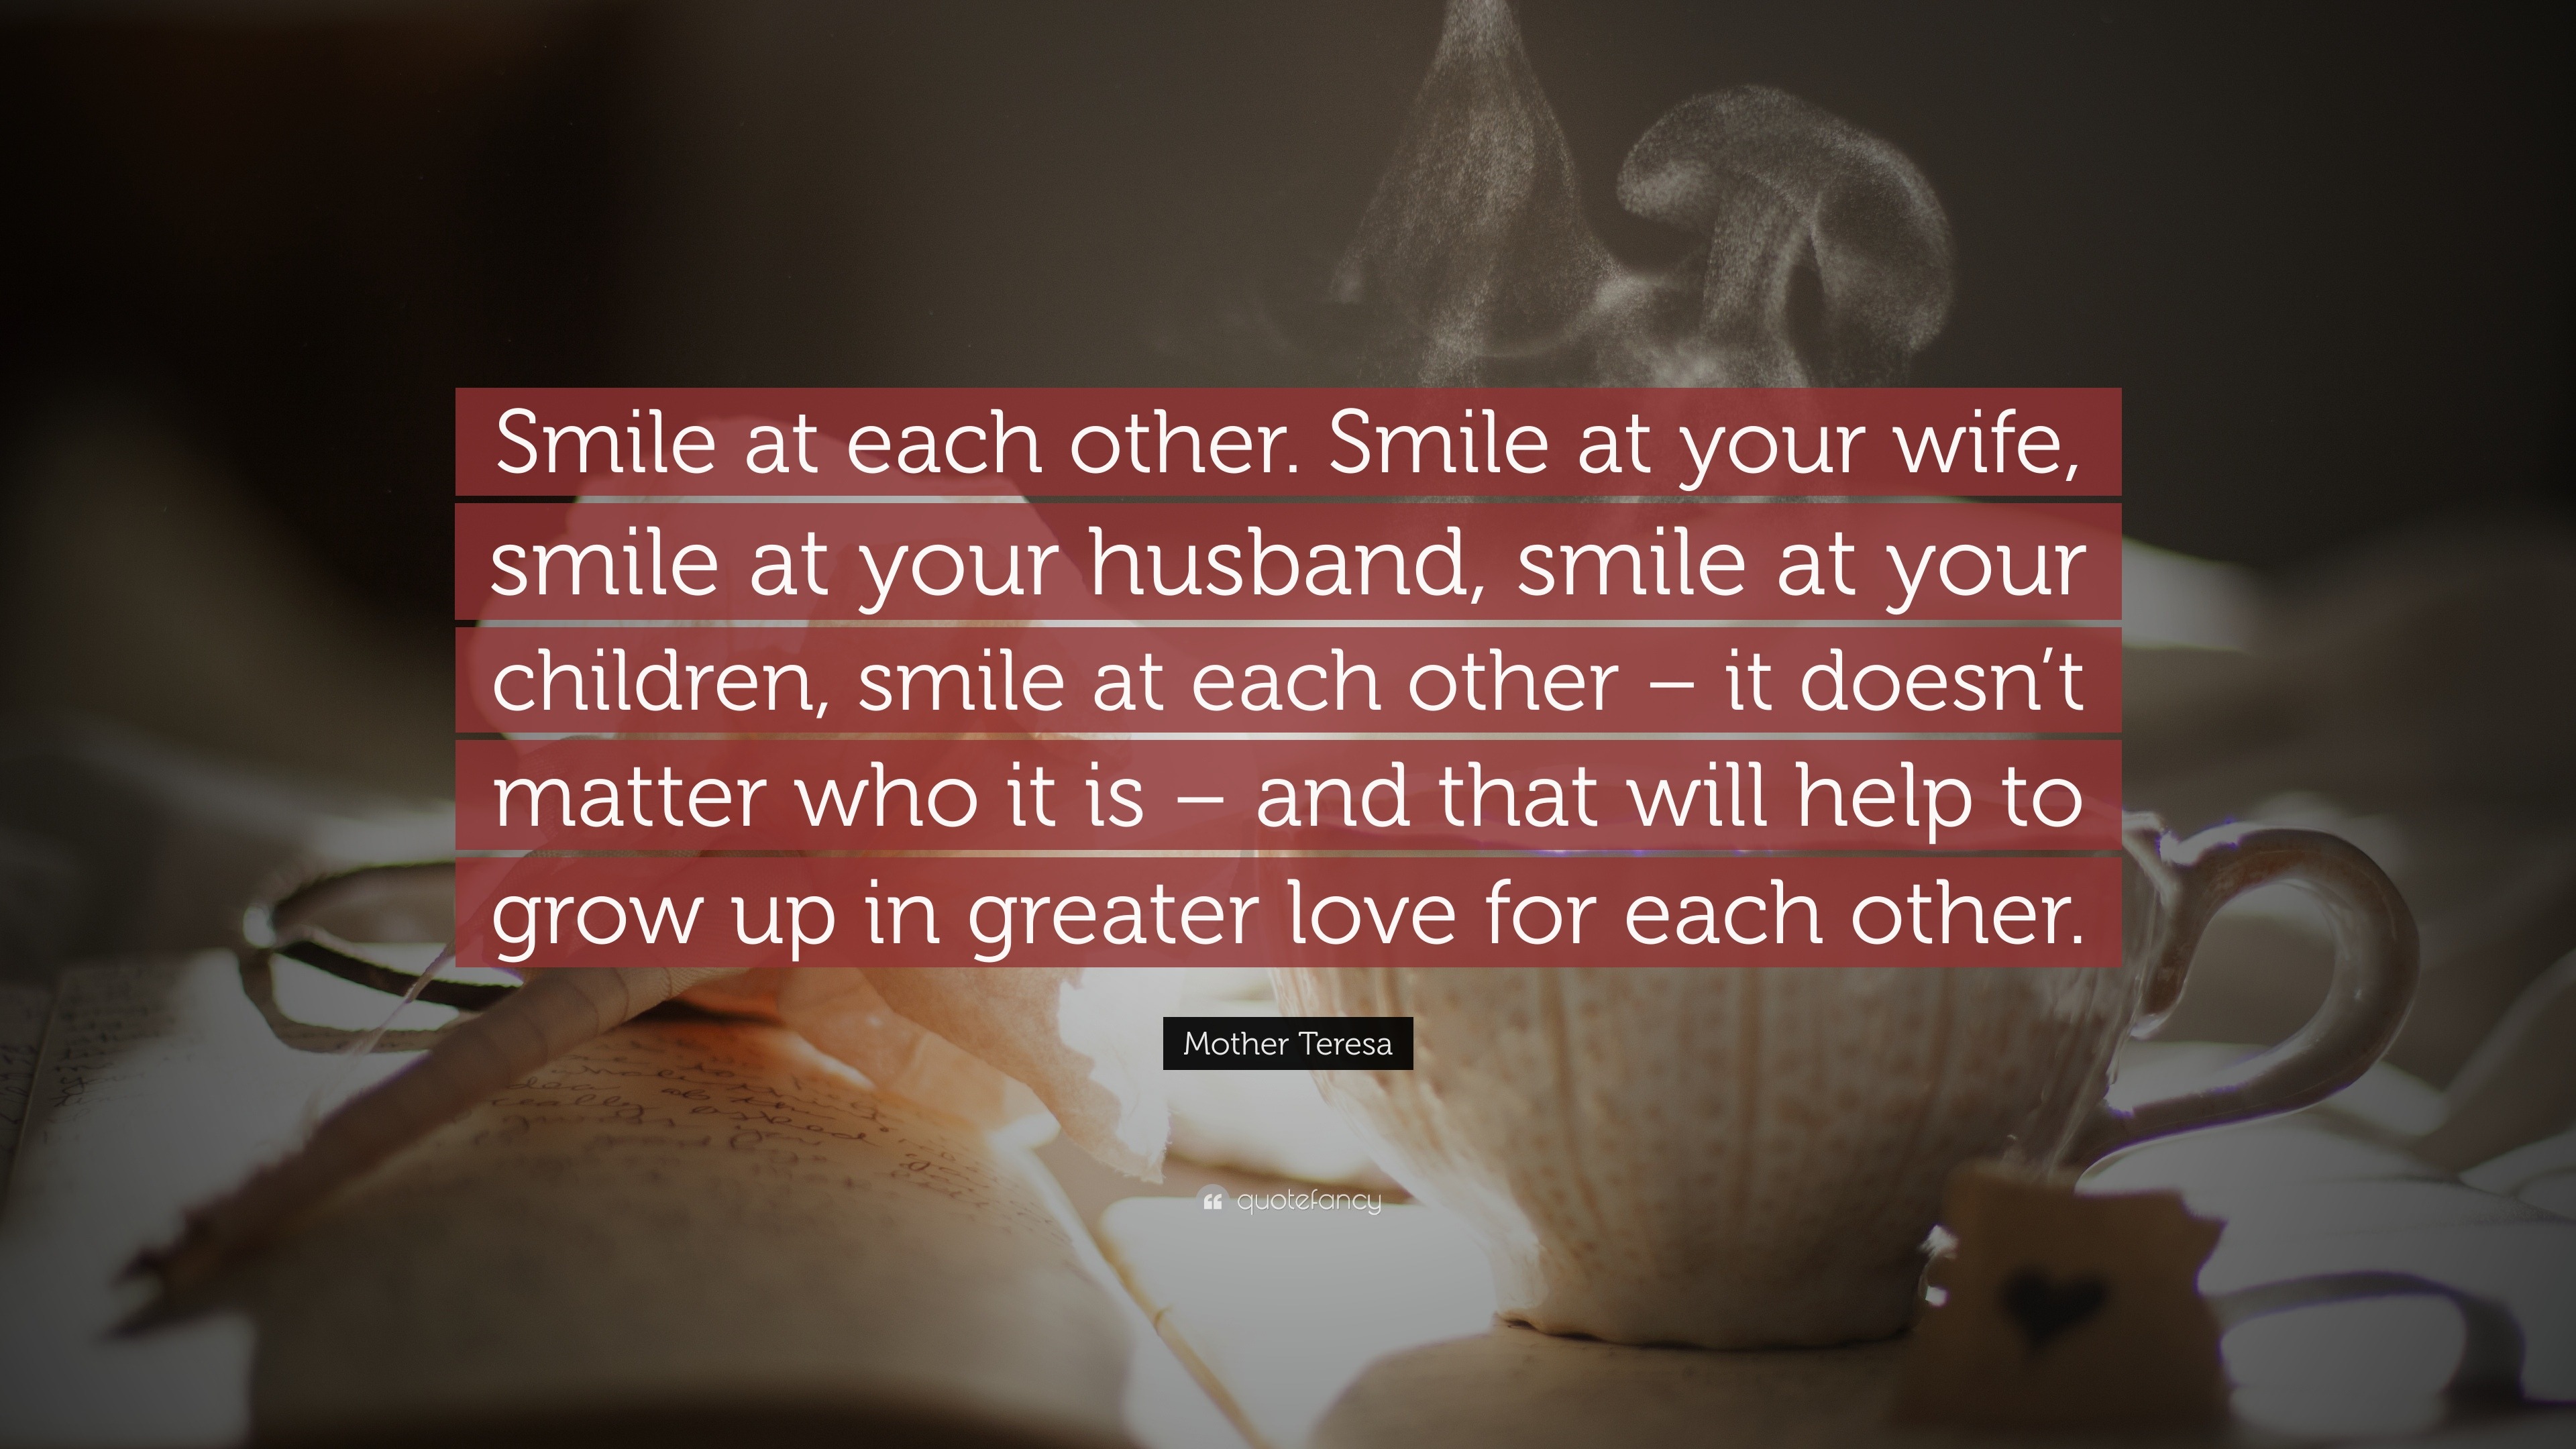 Mother Teresa Quote “Smile at each other Smile at your wife smile